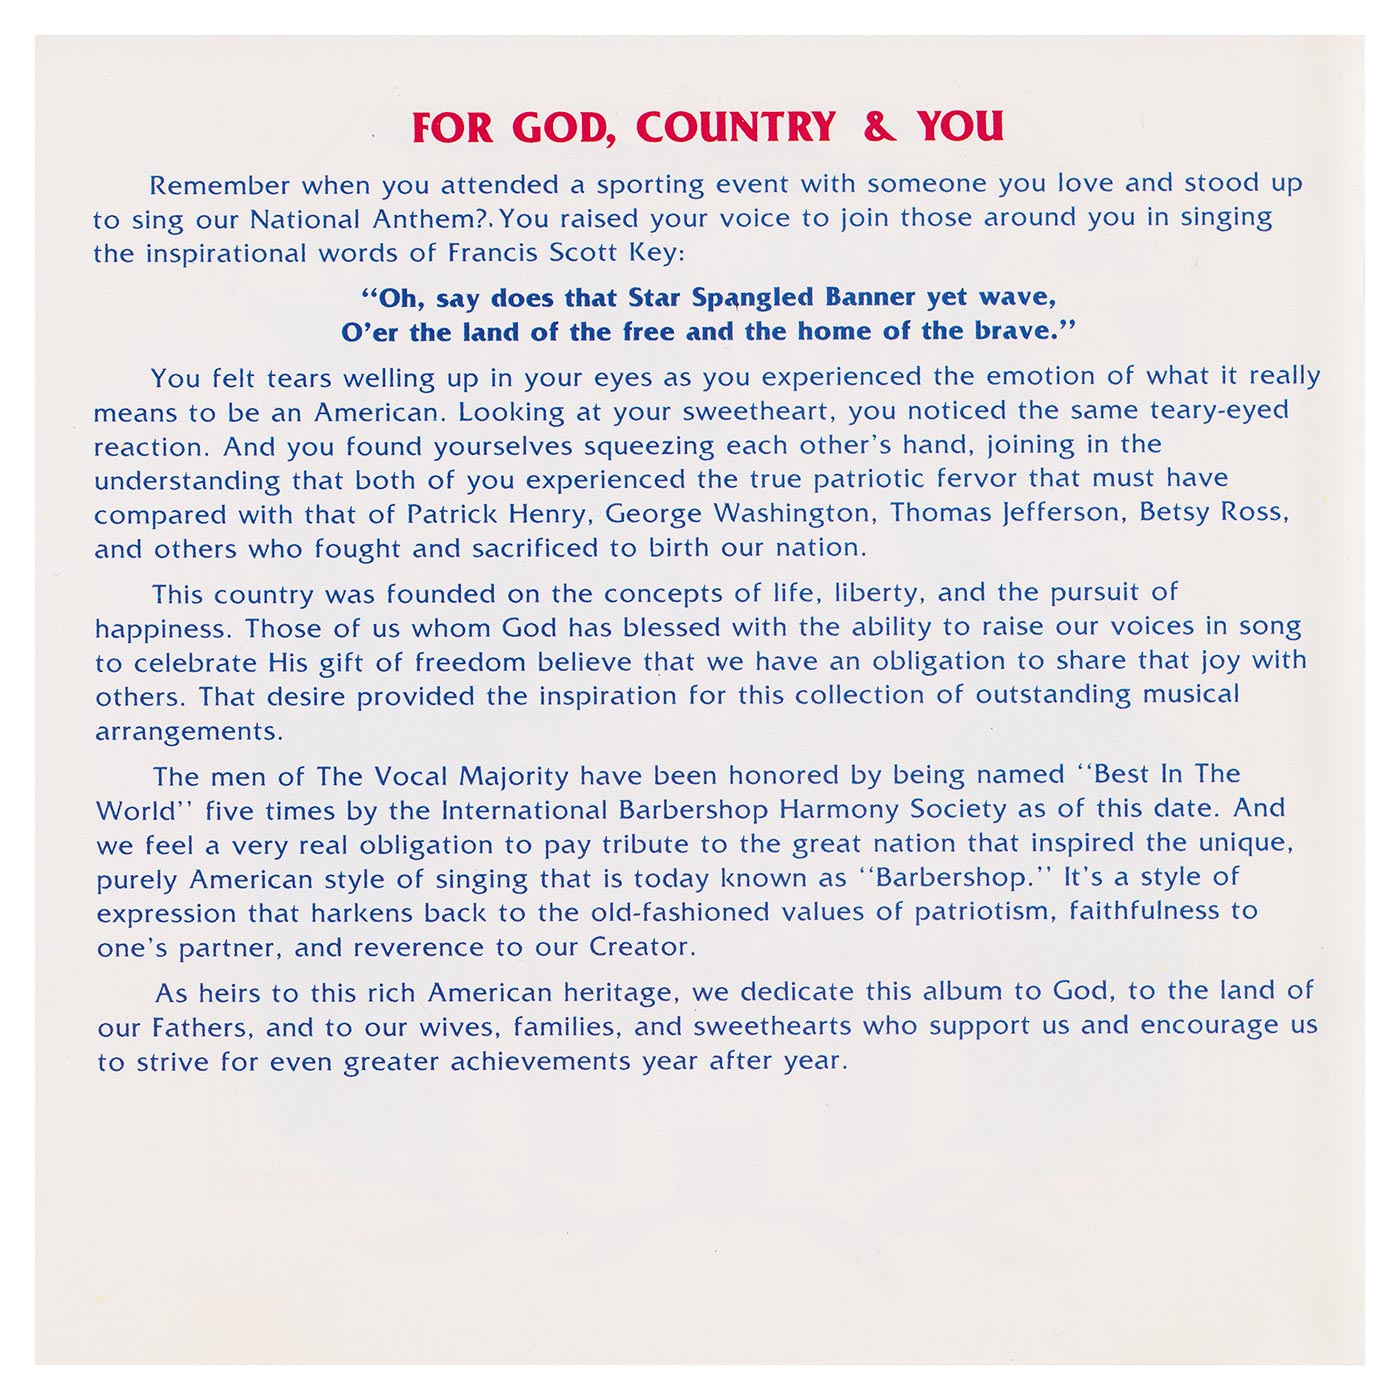 Booklet Inside Left Panel: For God, Country, and You